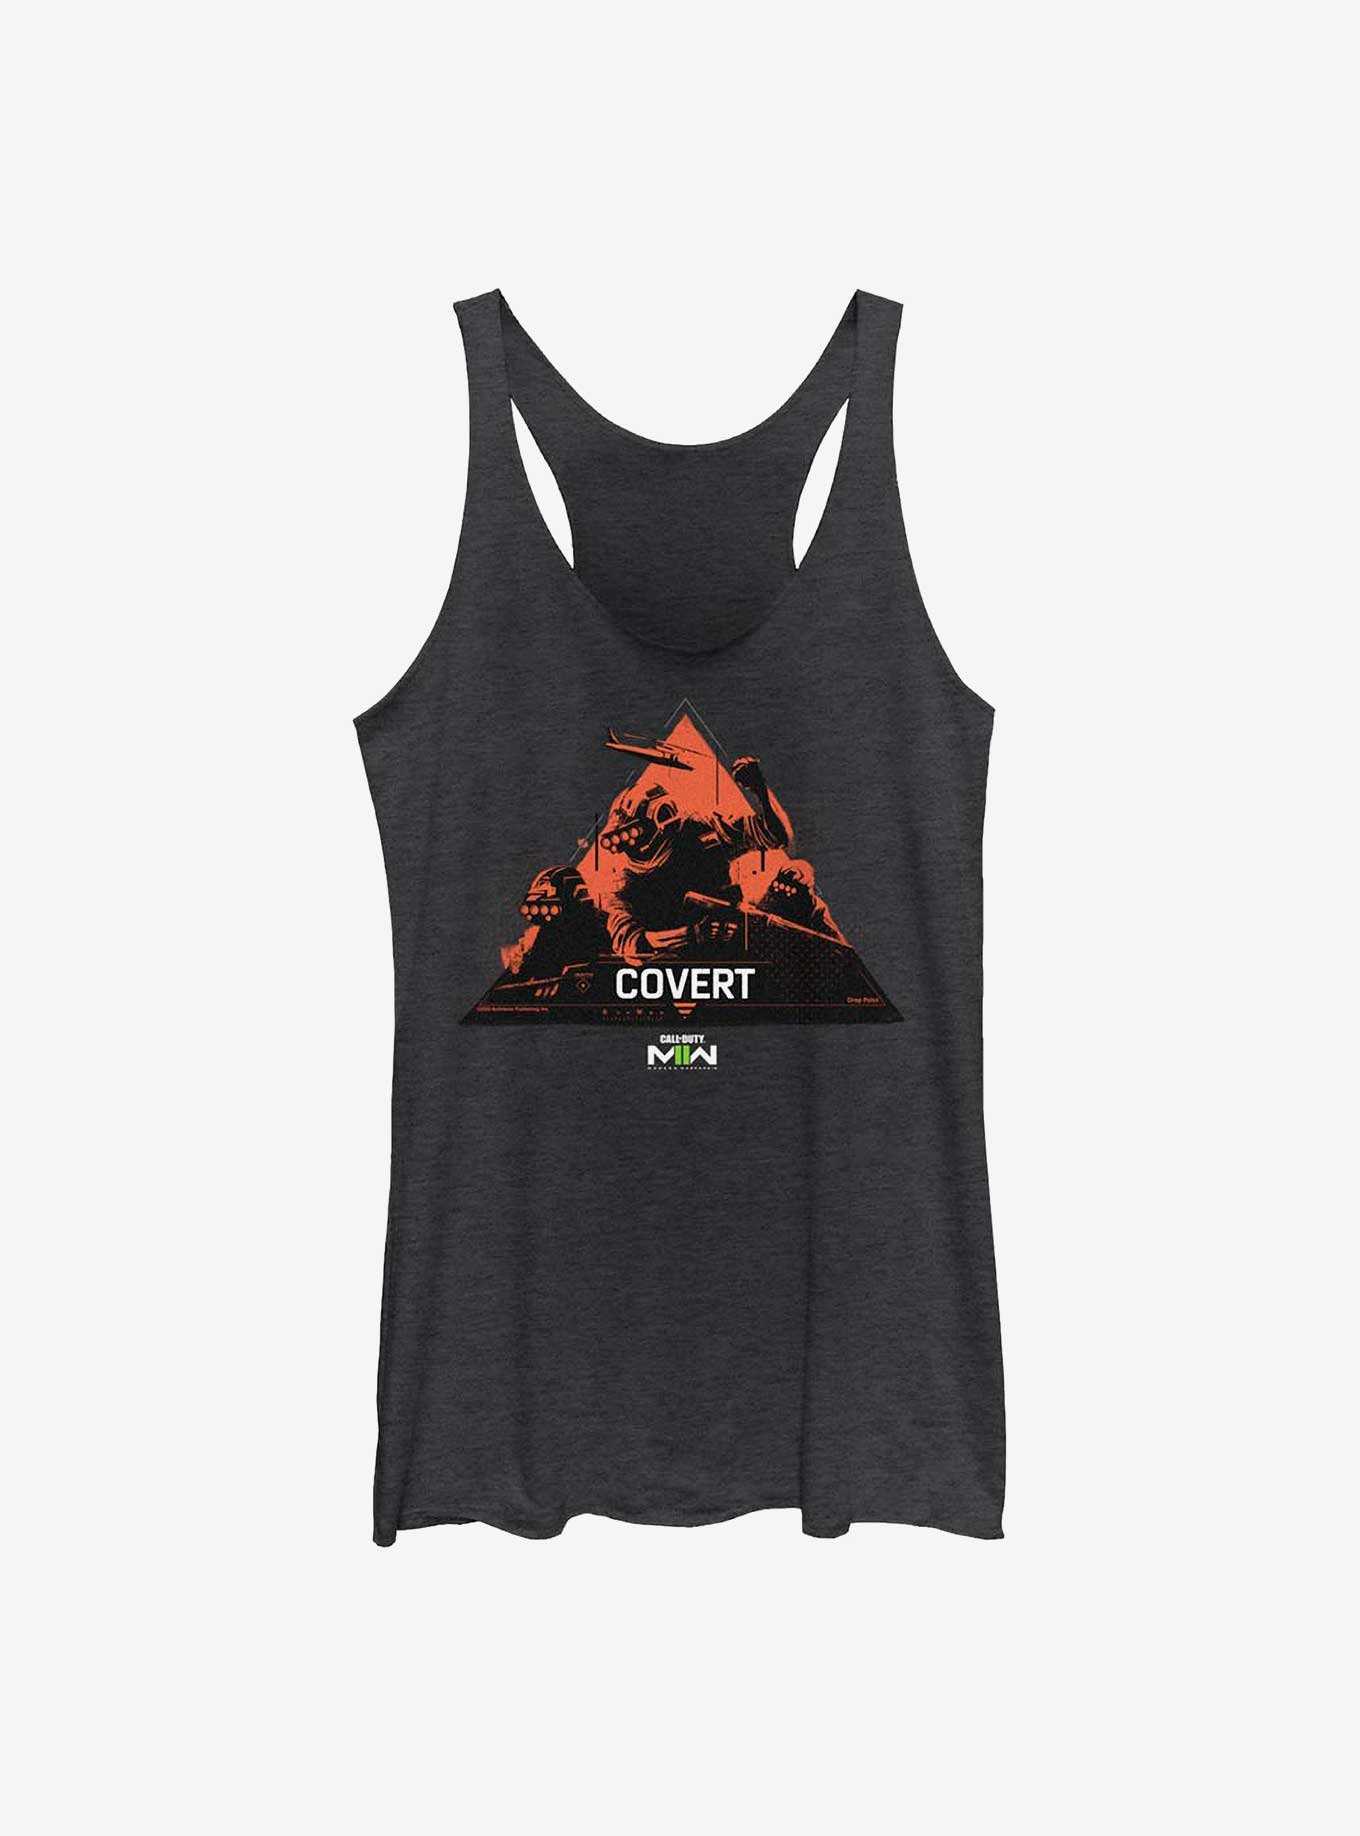 Call Of Duty Covert Red Variant Girls Raw Edge Tank, , hi-res